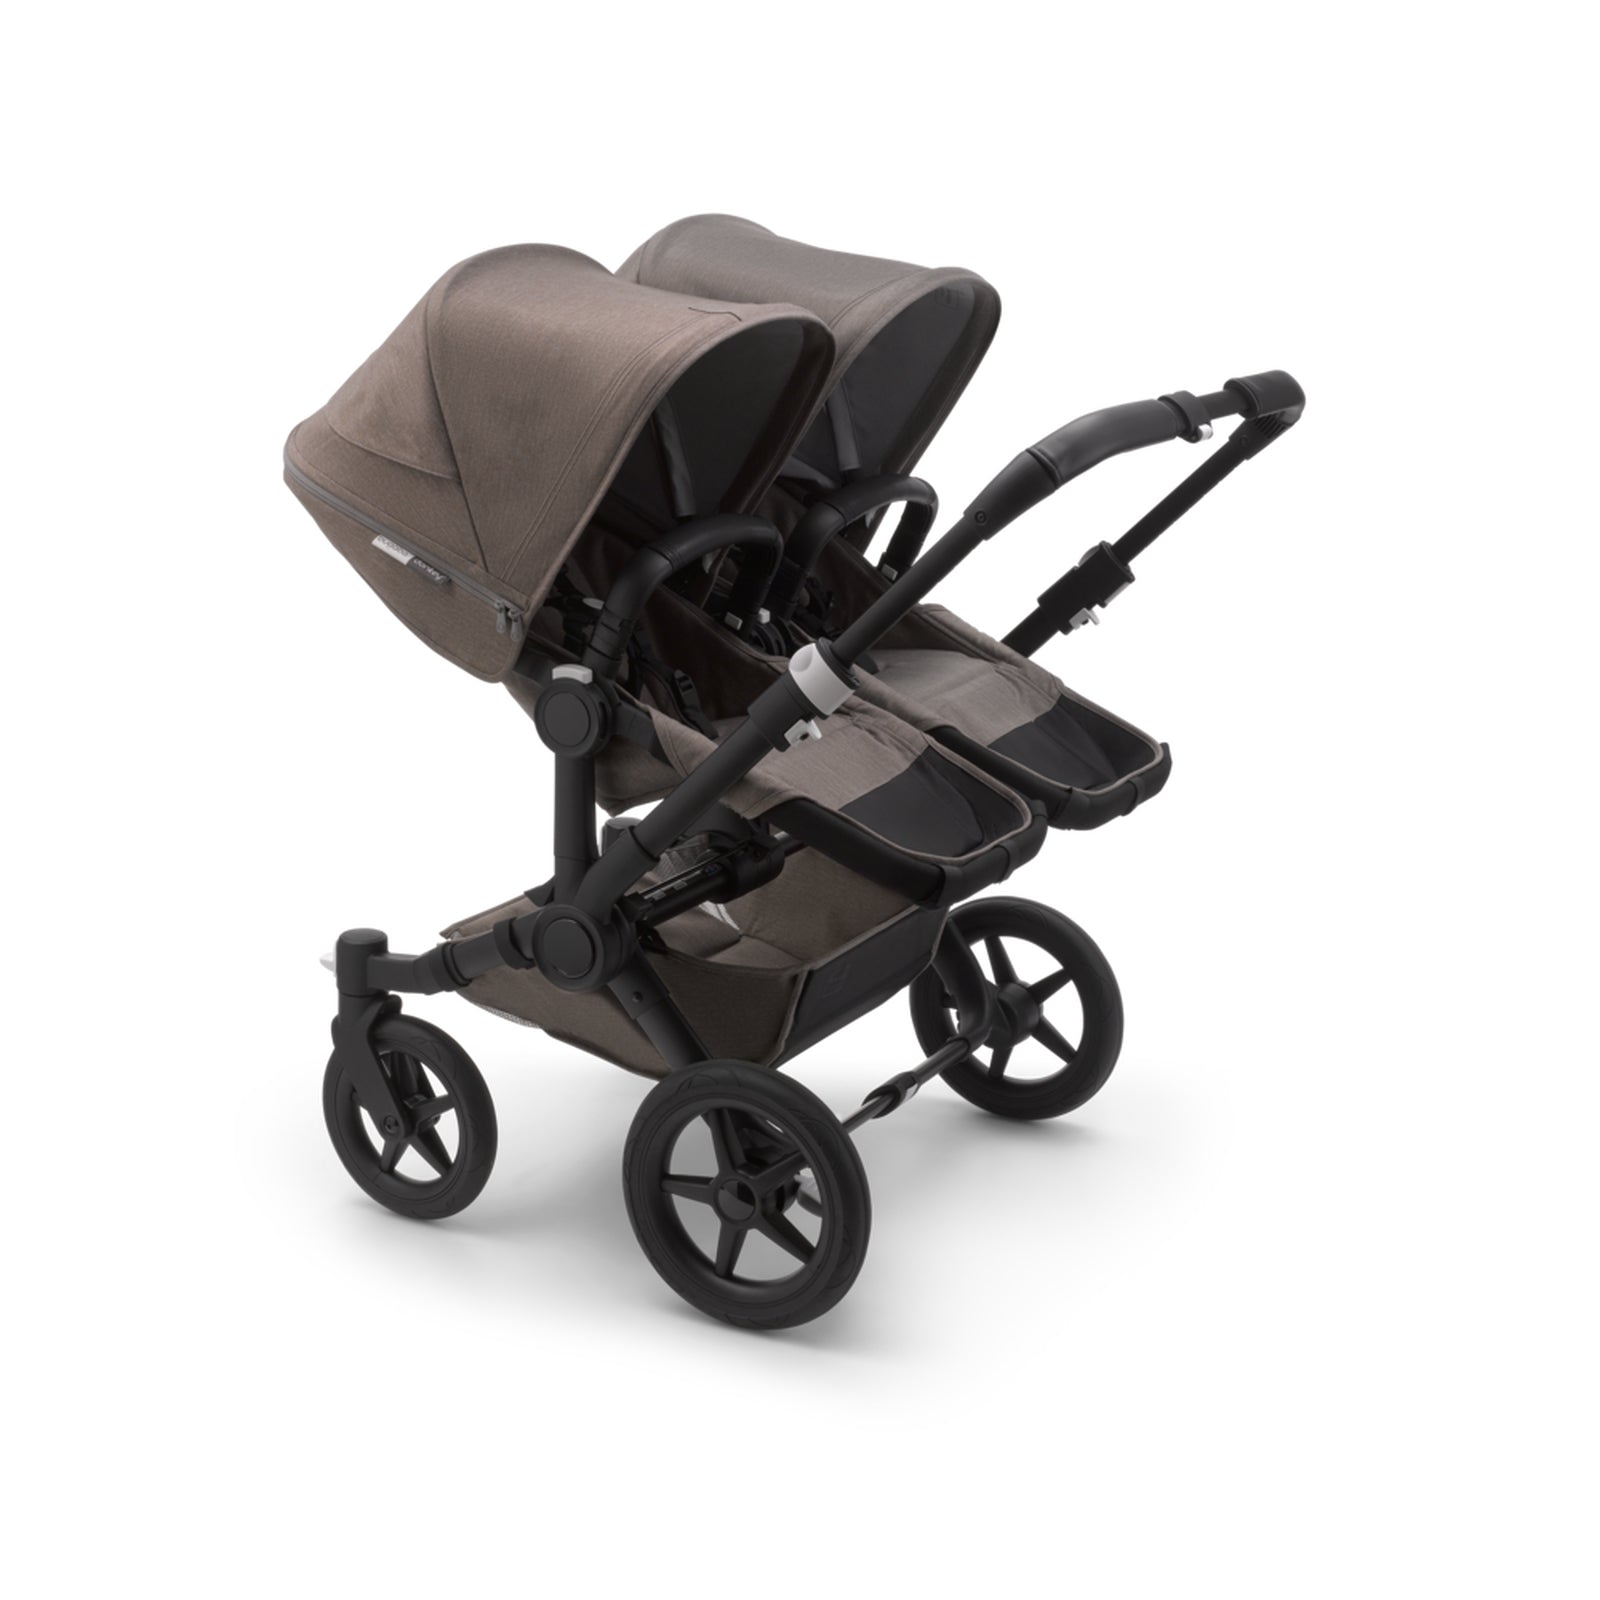 Bugaboo Donkey 3 Twin Seat and Carrycot Pushchair - Mineral Taupe Melange